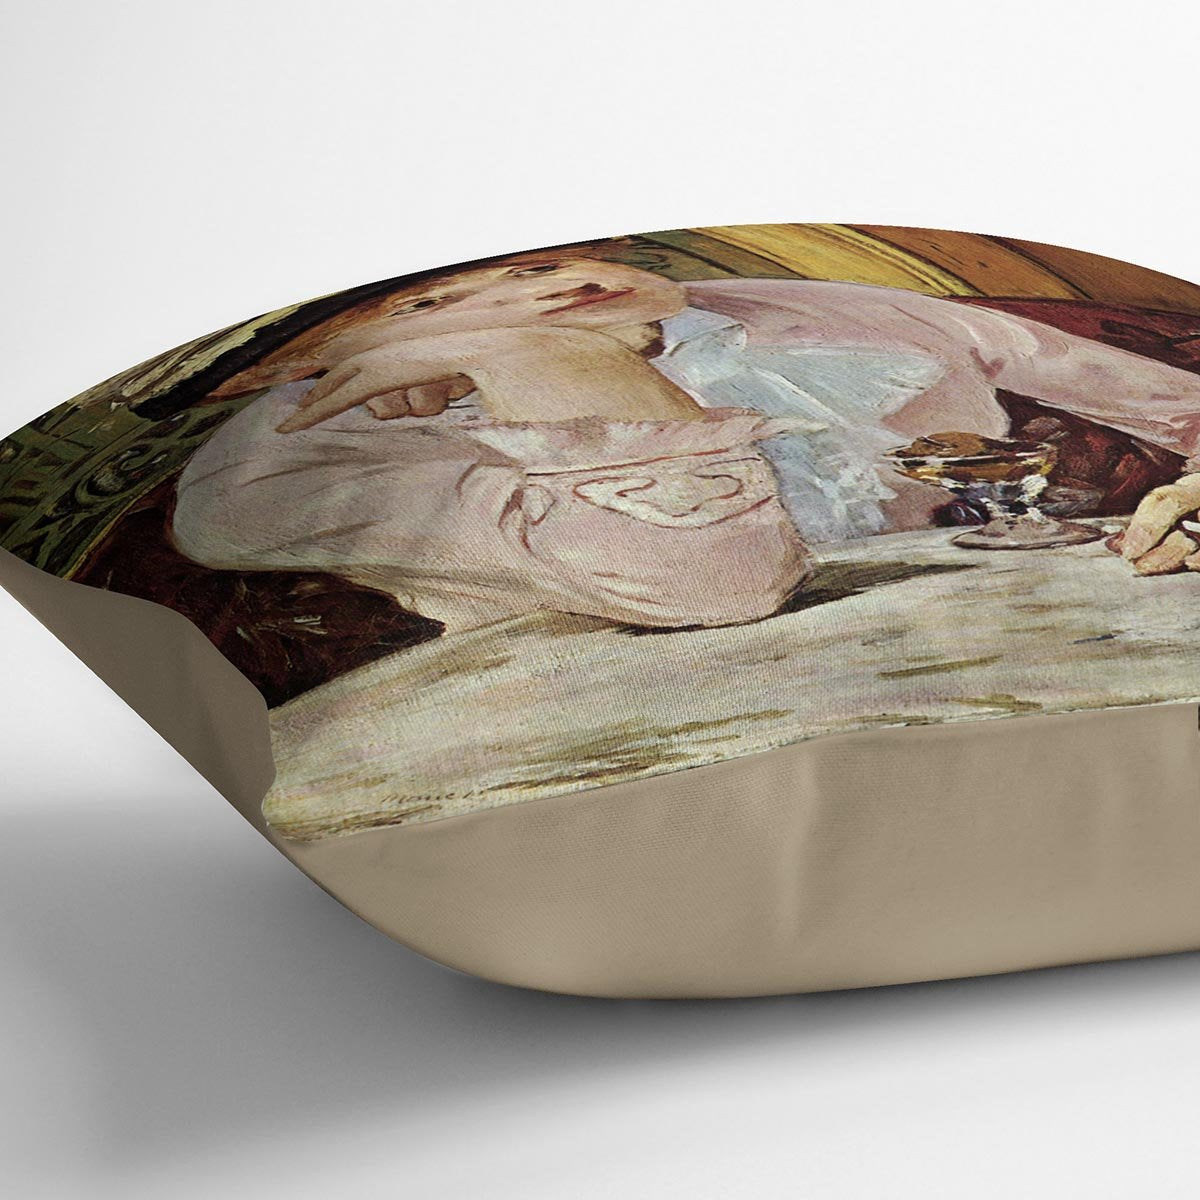 Pflaume by Manet Throw Pillow